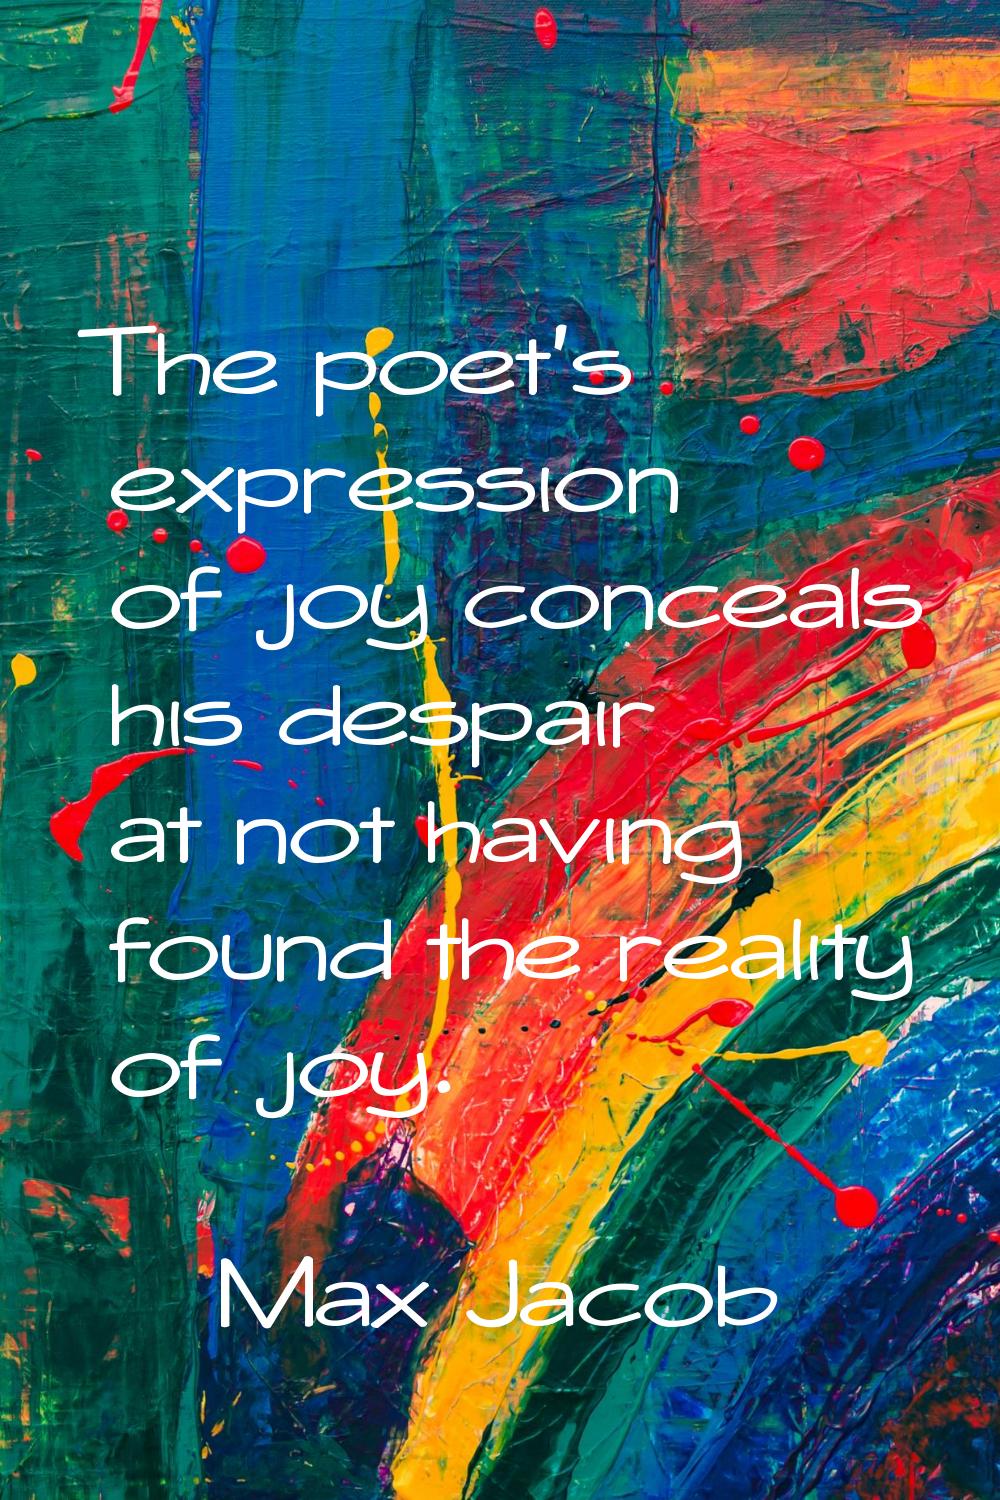 The poet's expression of joy conceals his despair at not having found the reality of joy.